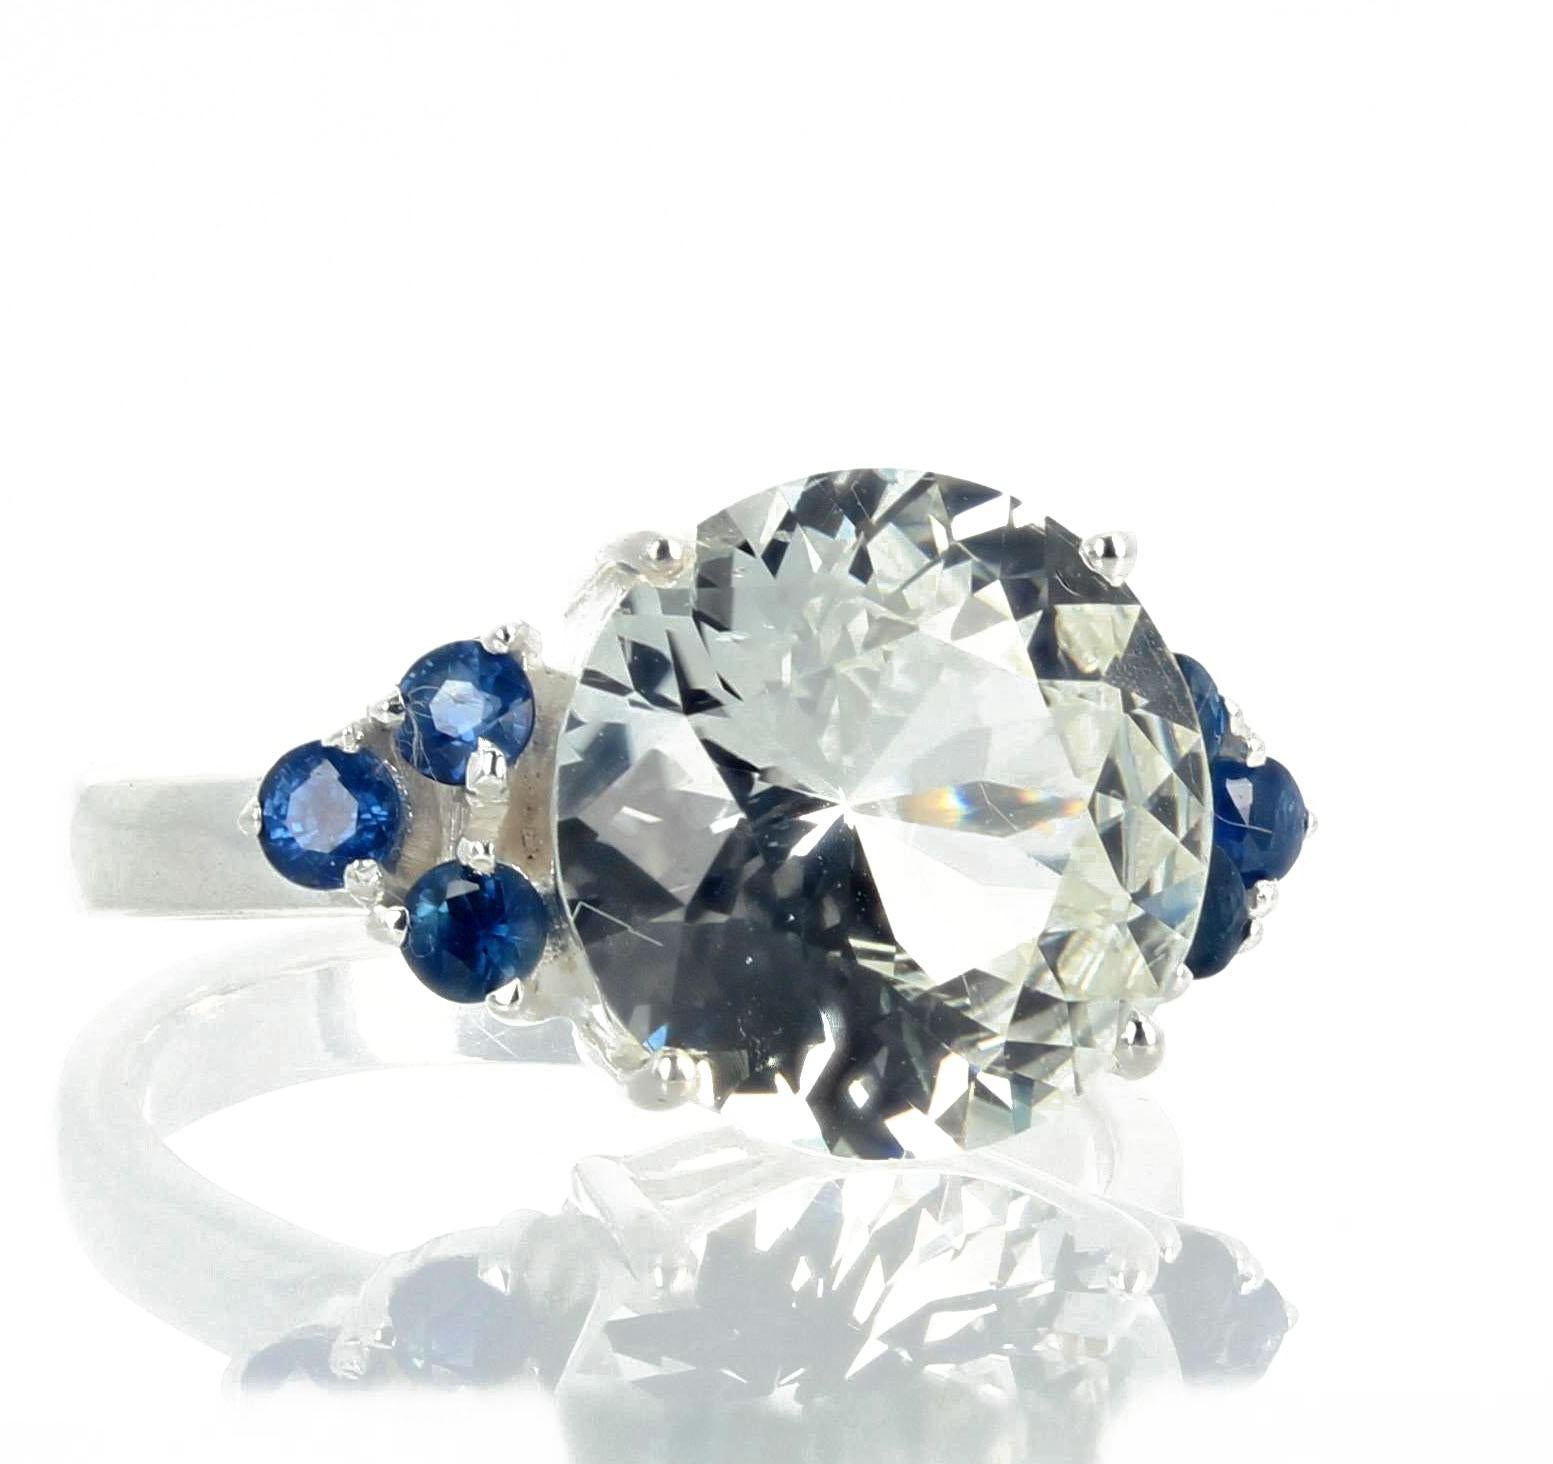 AJD Glittering 6.52 Carat Natural Fiery White Zircon & Blue Sapphires Ring For Sale 4